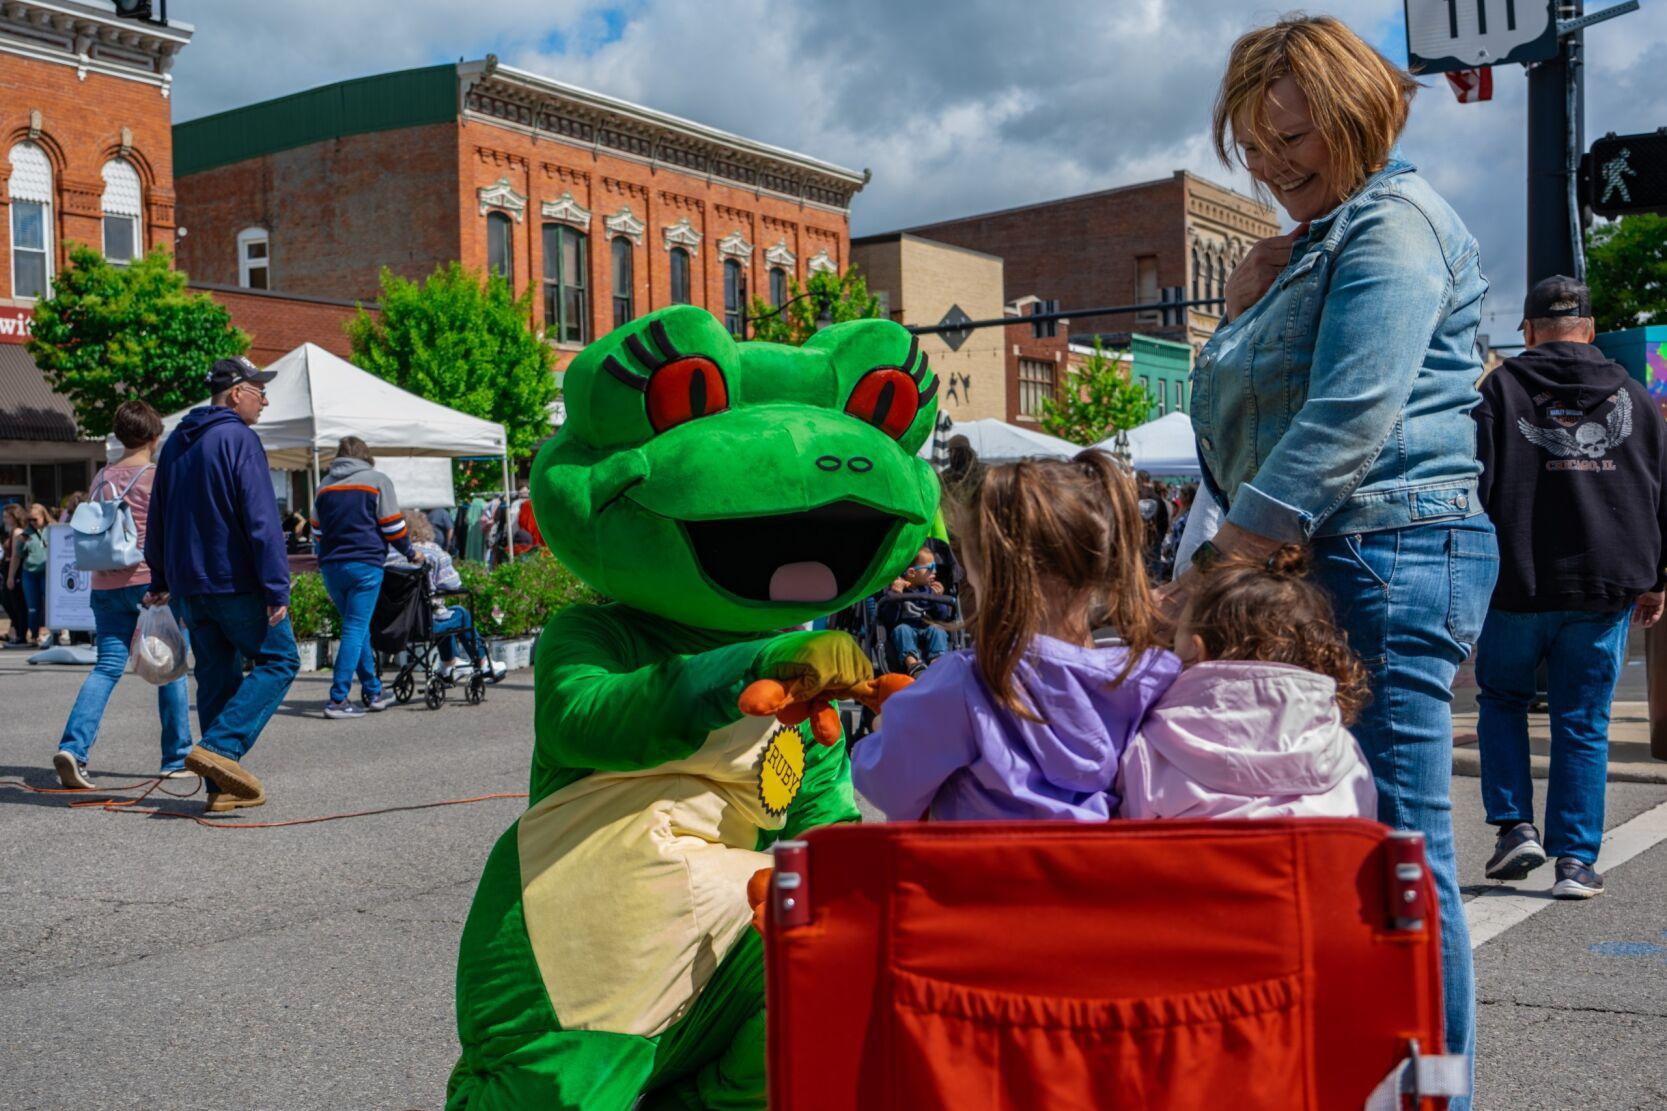 Station mascot Ruby the Red-eyed Tree Frog giving 2 girls in a wagon a fist bump